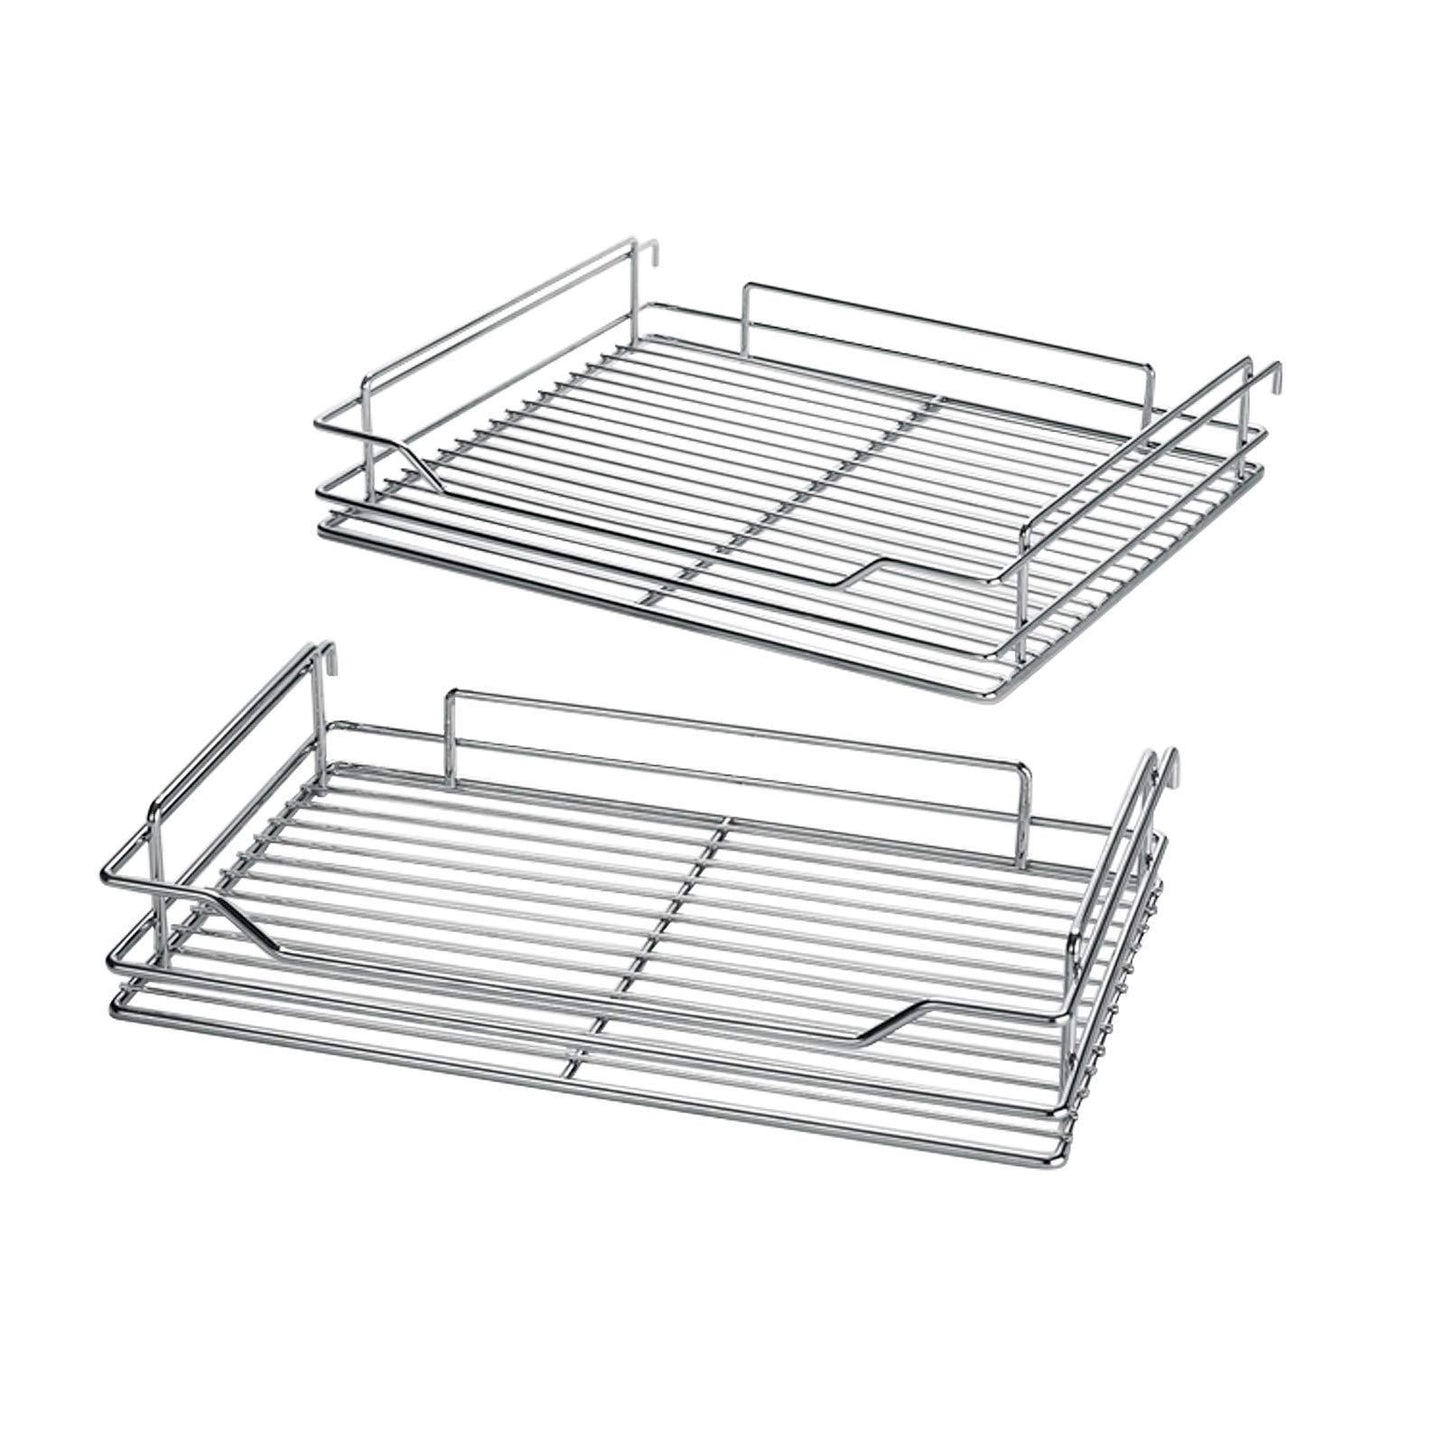 Shop here 34 6x21 3x8 3 in under cabinet pull out chrome 4 tier wire basket organizer cabinet dish rack shelves bowl utensils holder full pullout set gray bottom